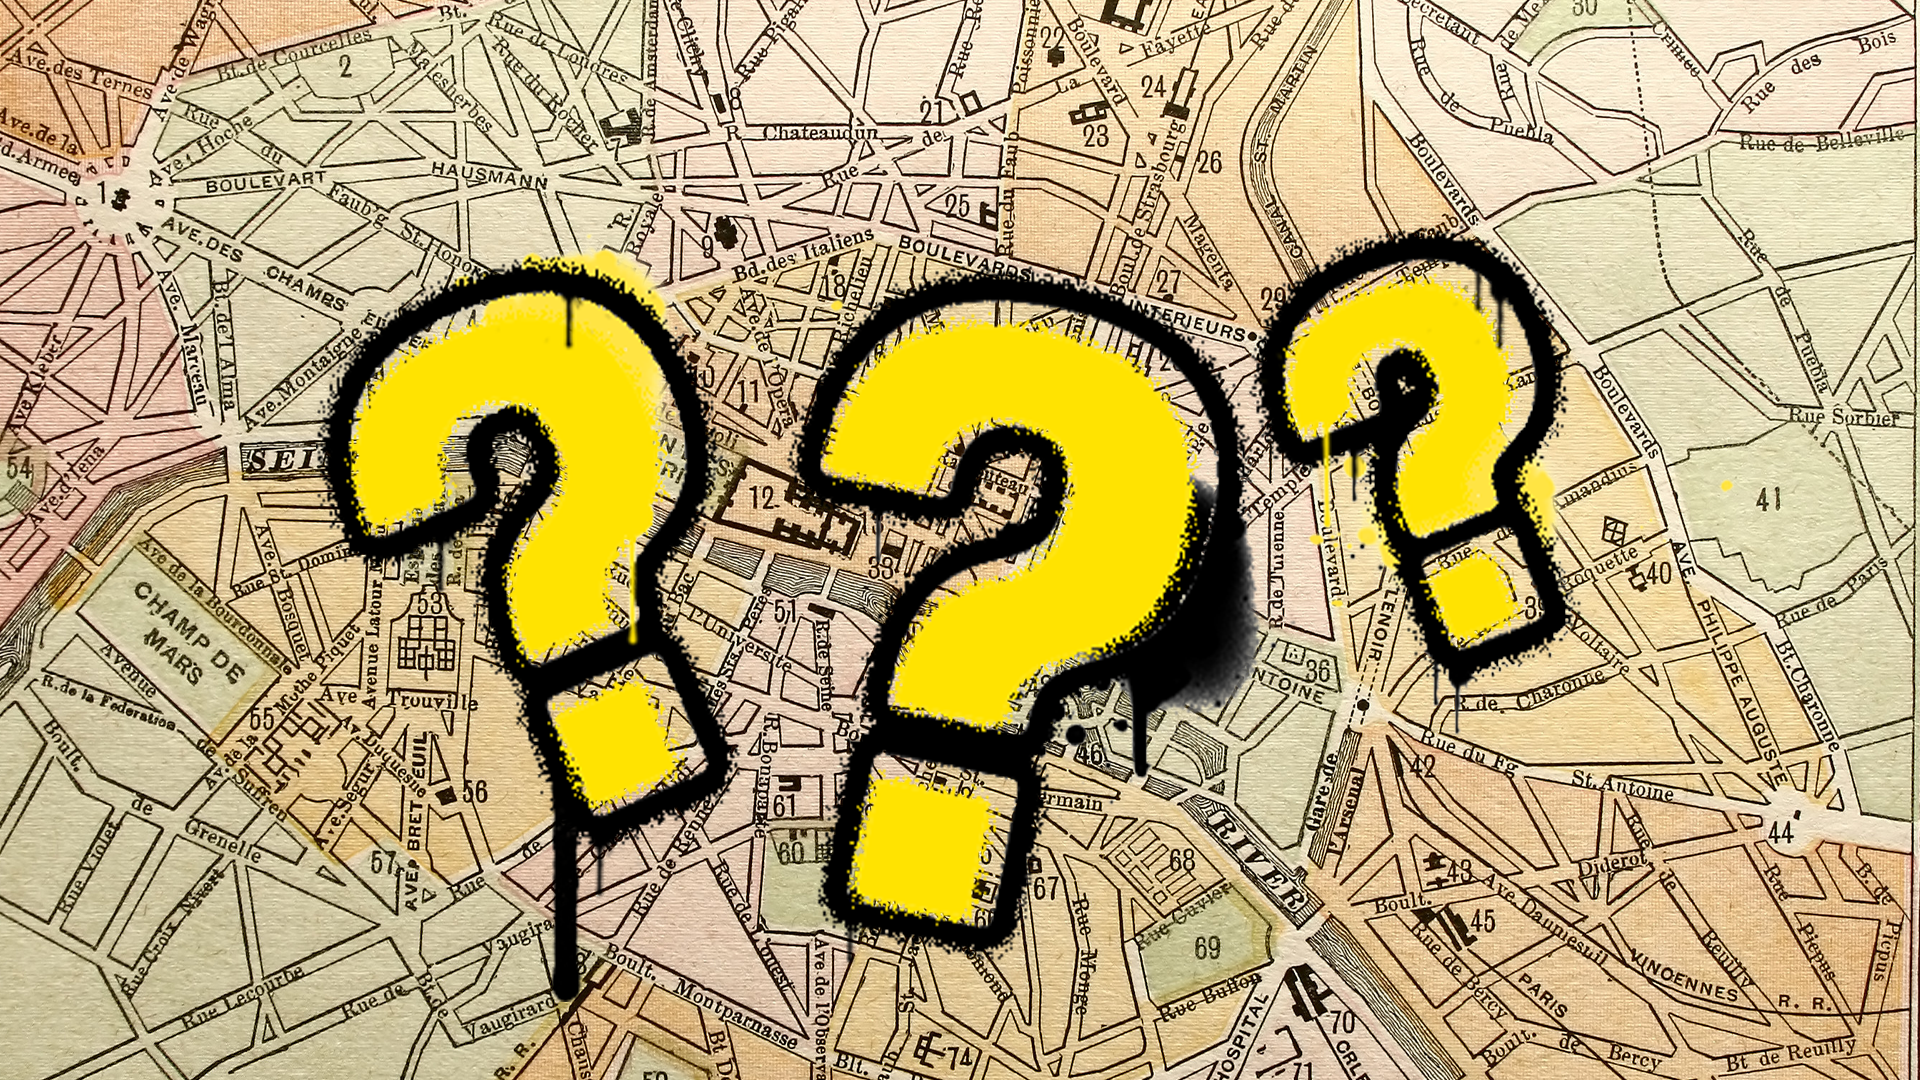 Old map of Paris and question marks